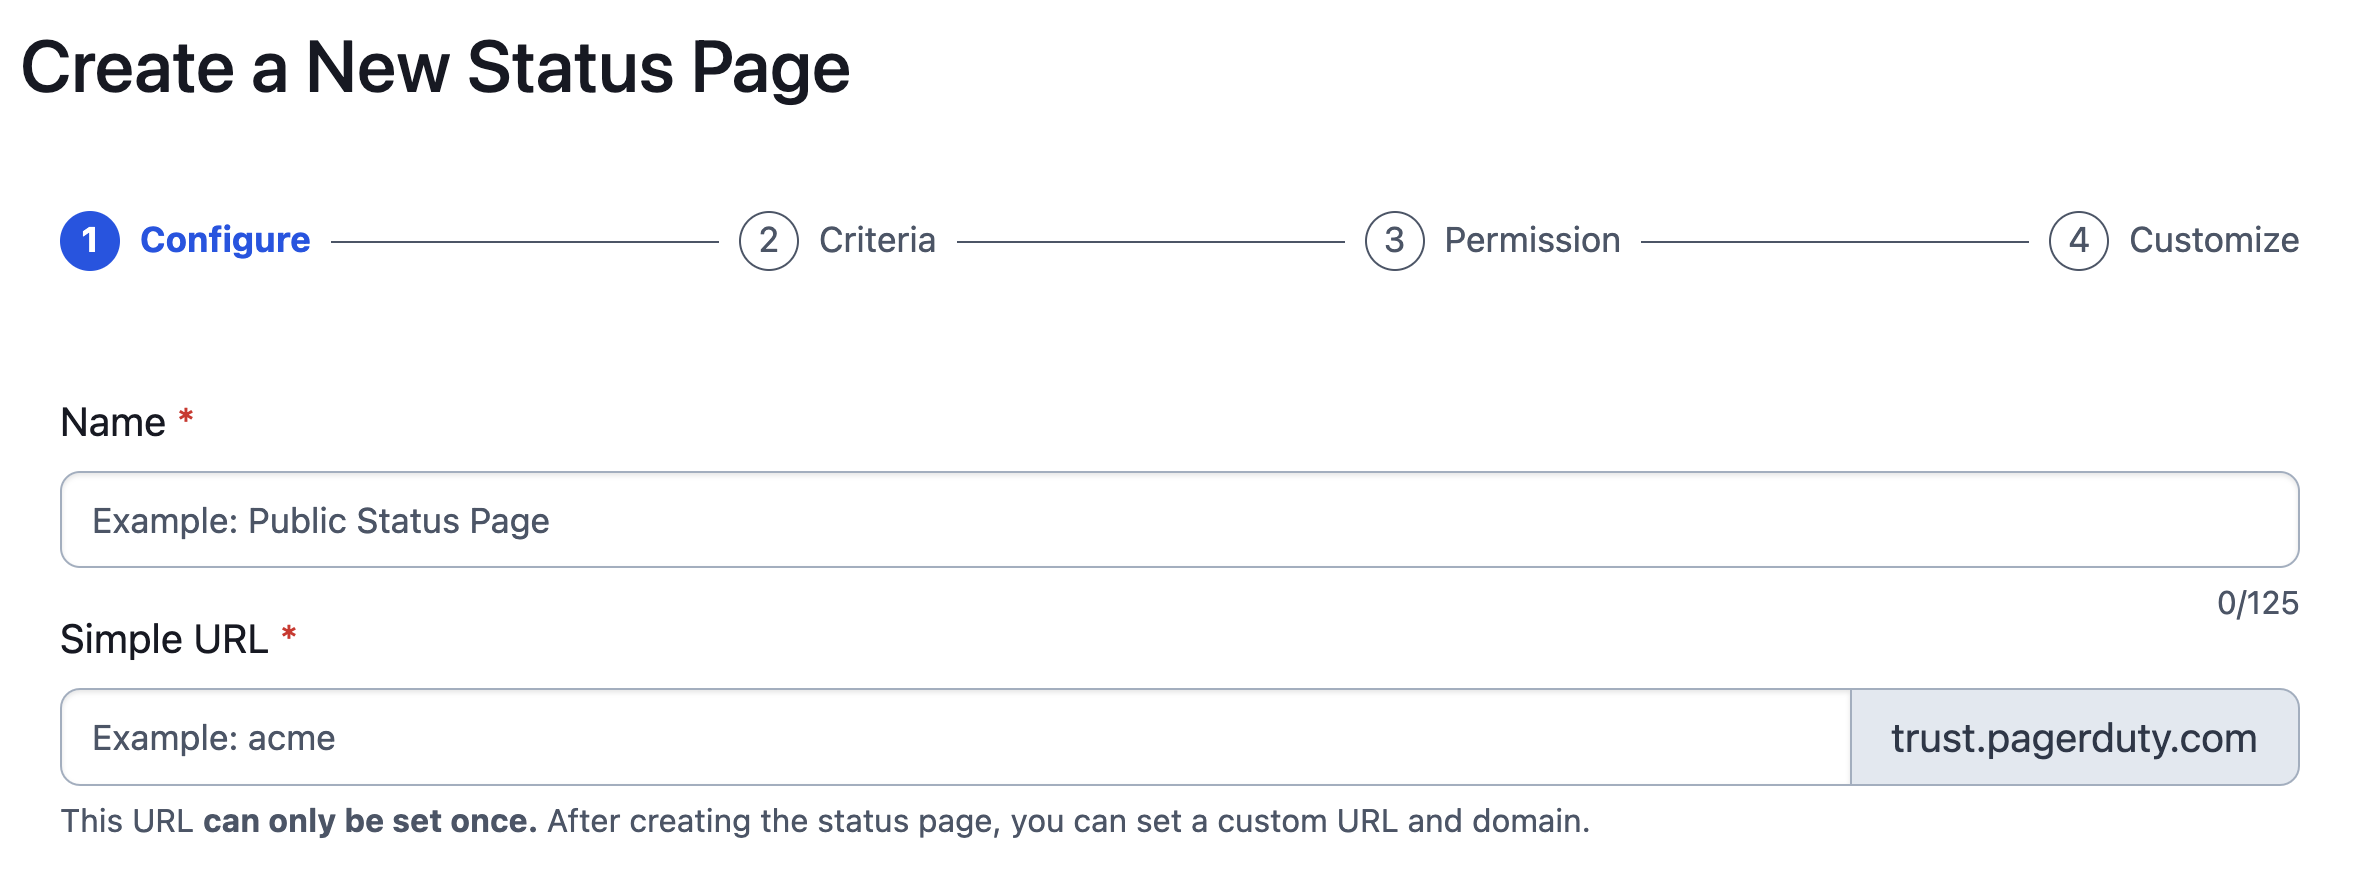 Create a new status page